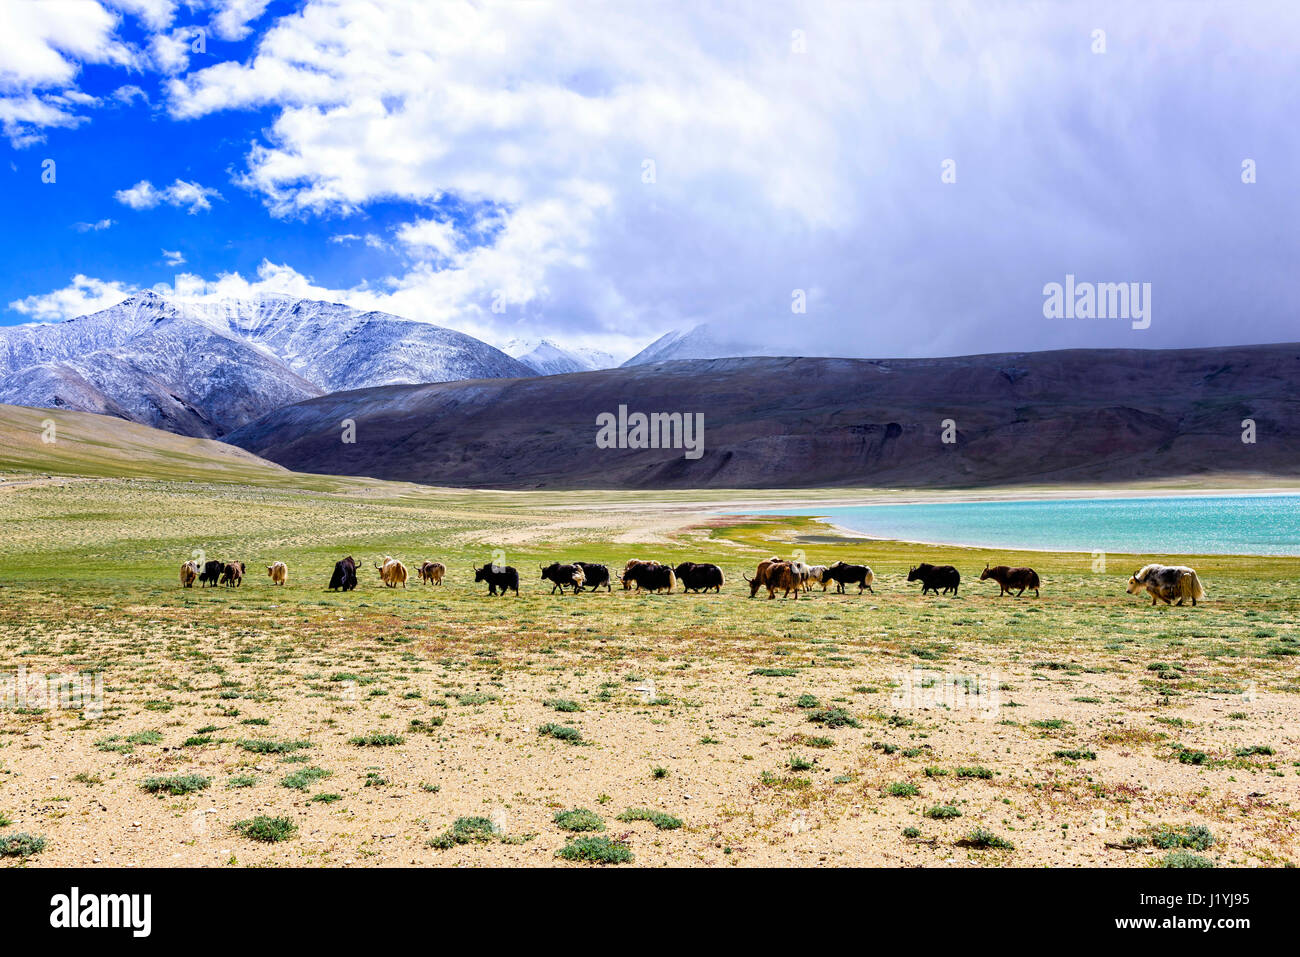 Yak herd in Tso Moriri lake area in Ladakh region, India. The domestic yak is a long haired domesticated bovid found throughout the Himalaya region Stock Photo